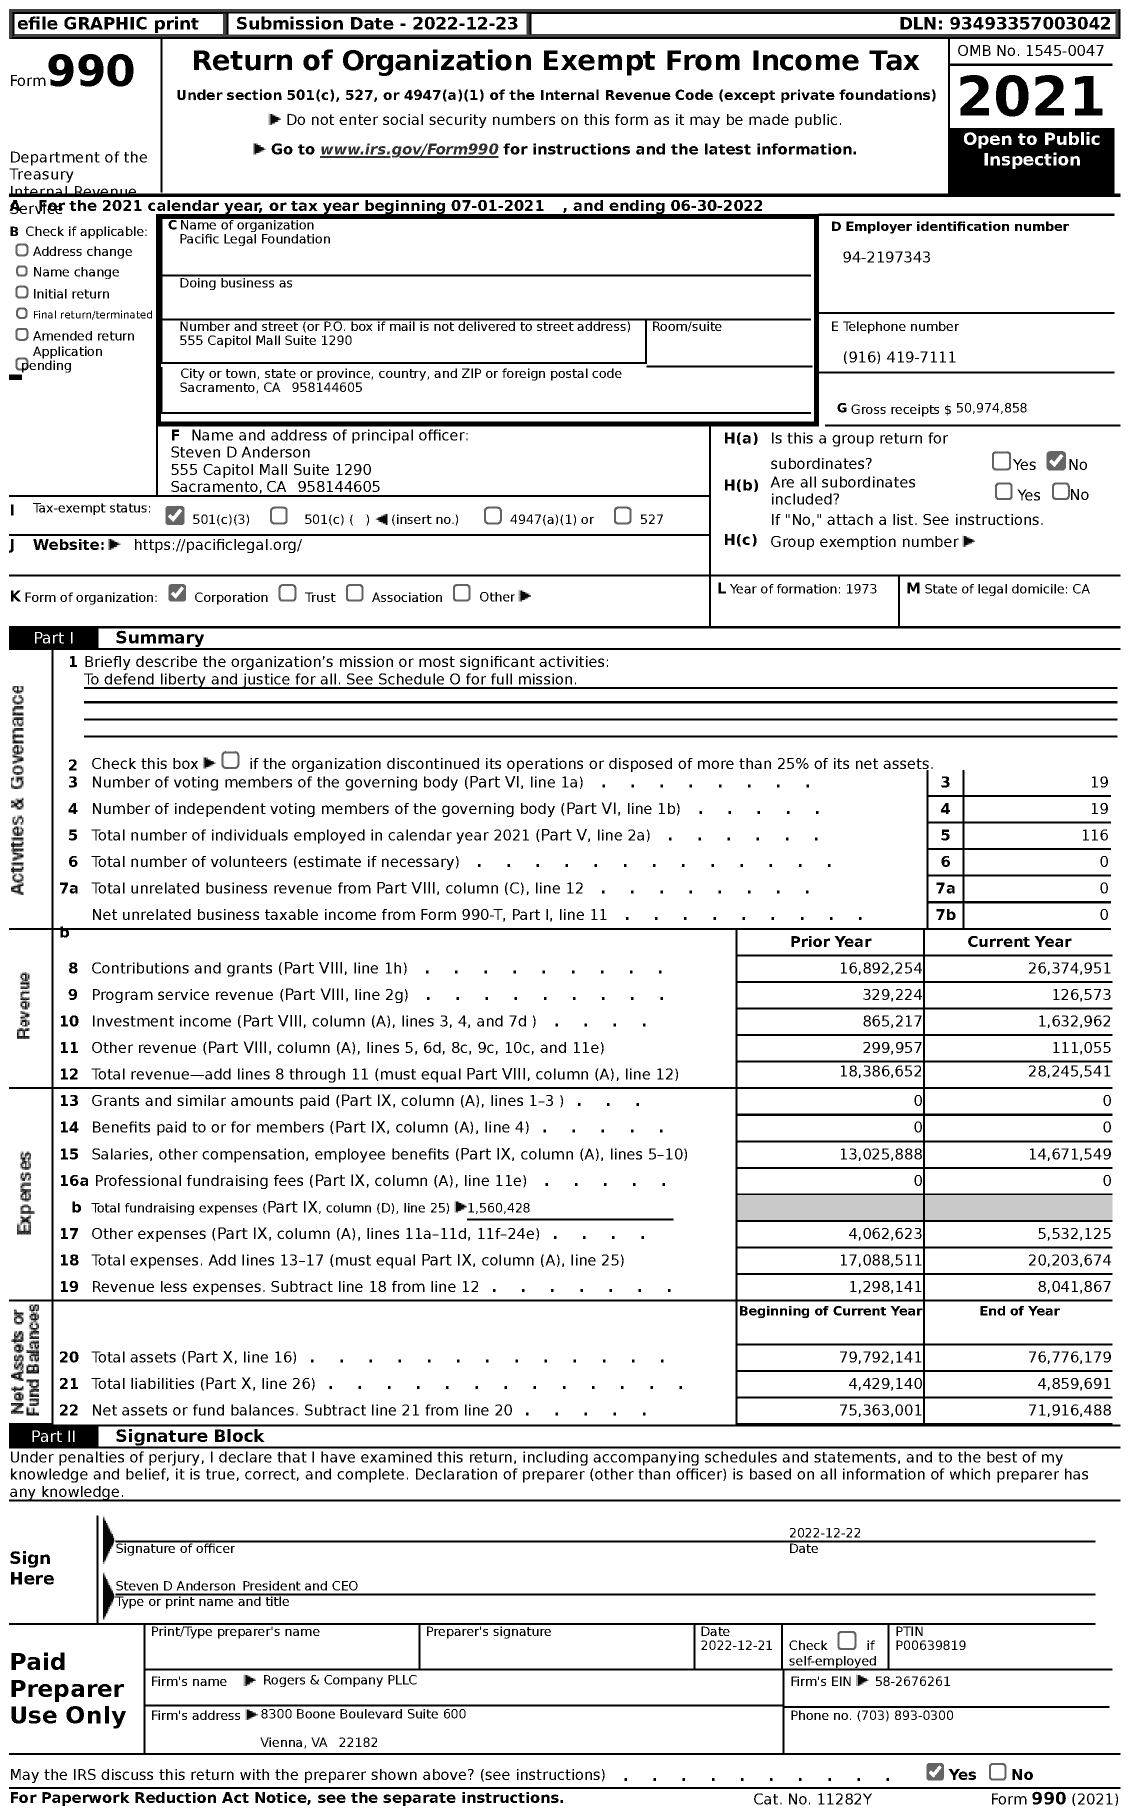 Image of first page of 2021 Form 990 for Pacific Legal Foundation (PLF)